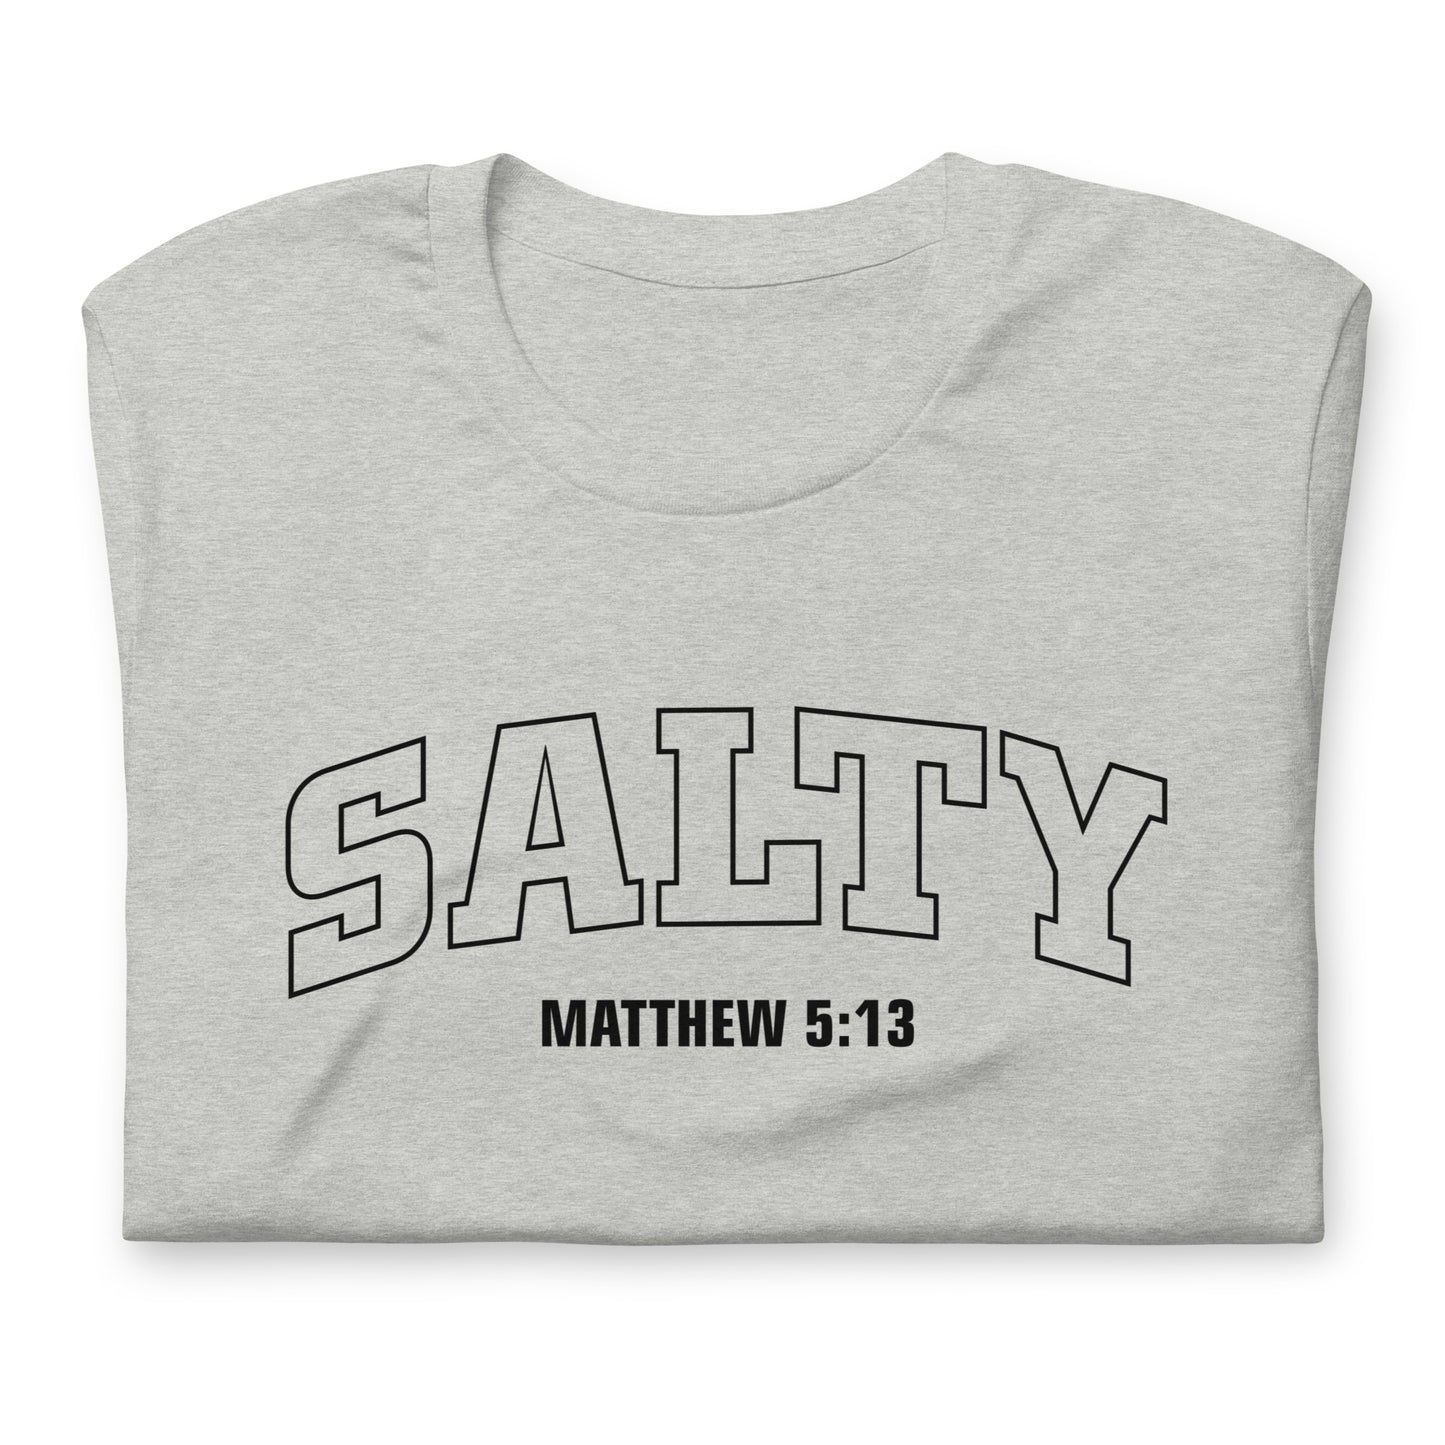 SALTY Matthew 5:13 T-shirt in Athletic Heather with Black lettering